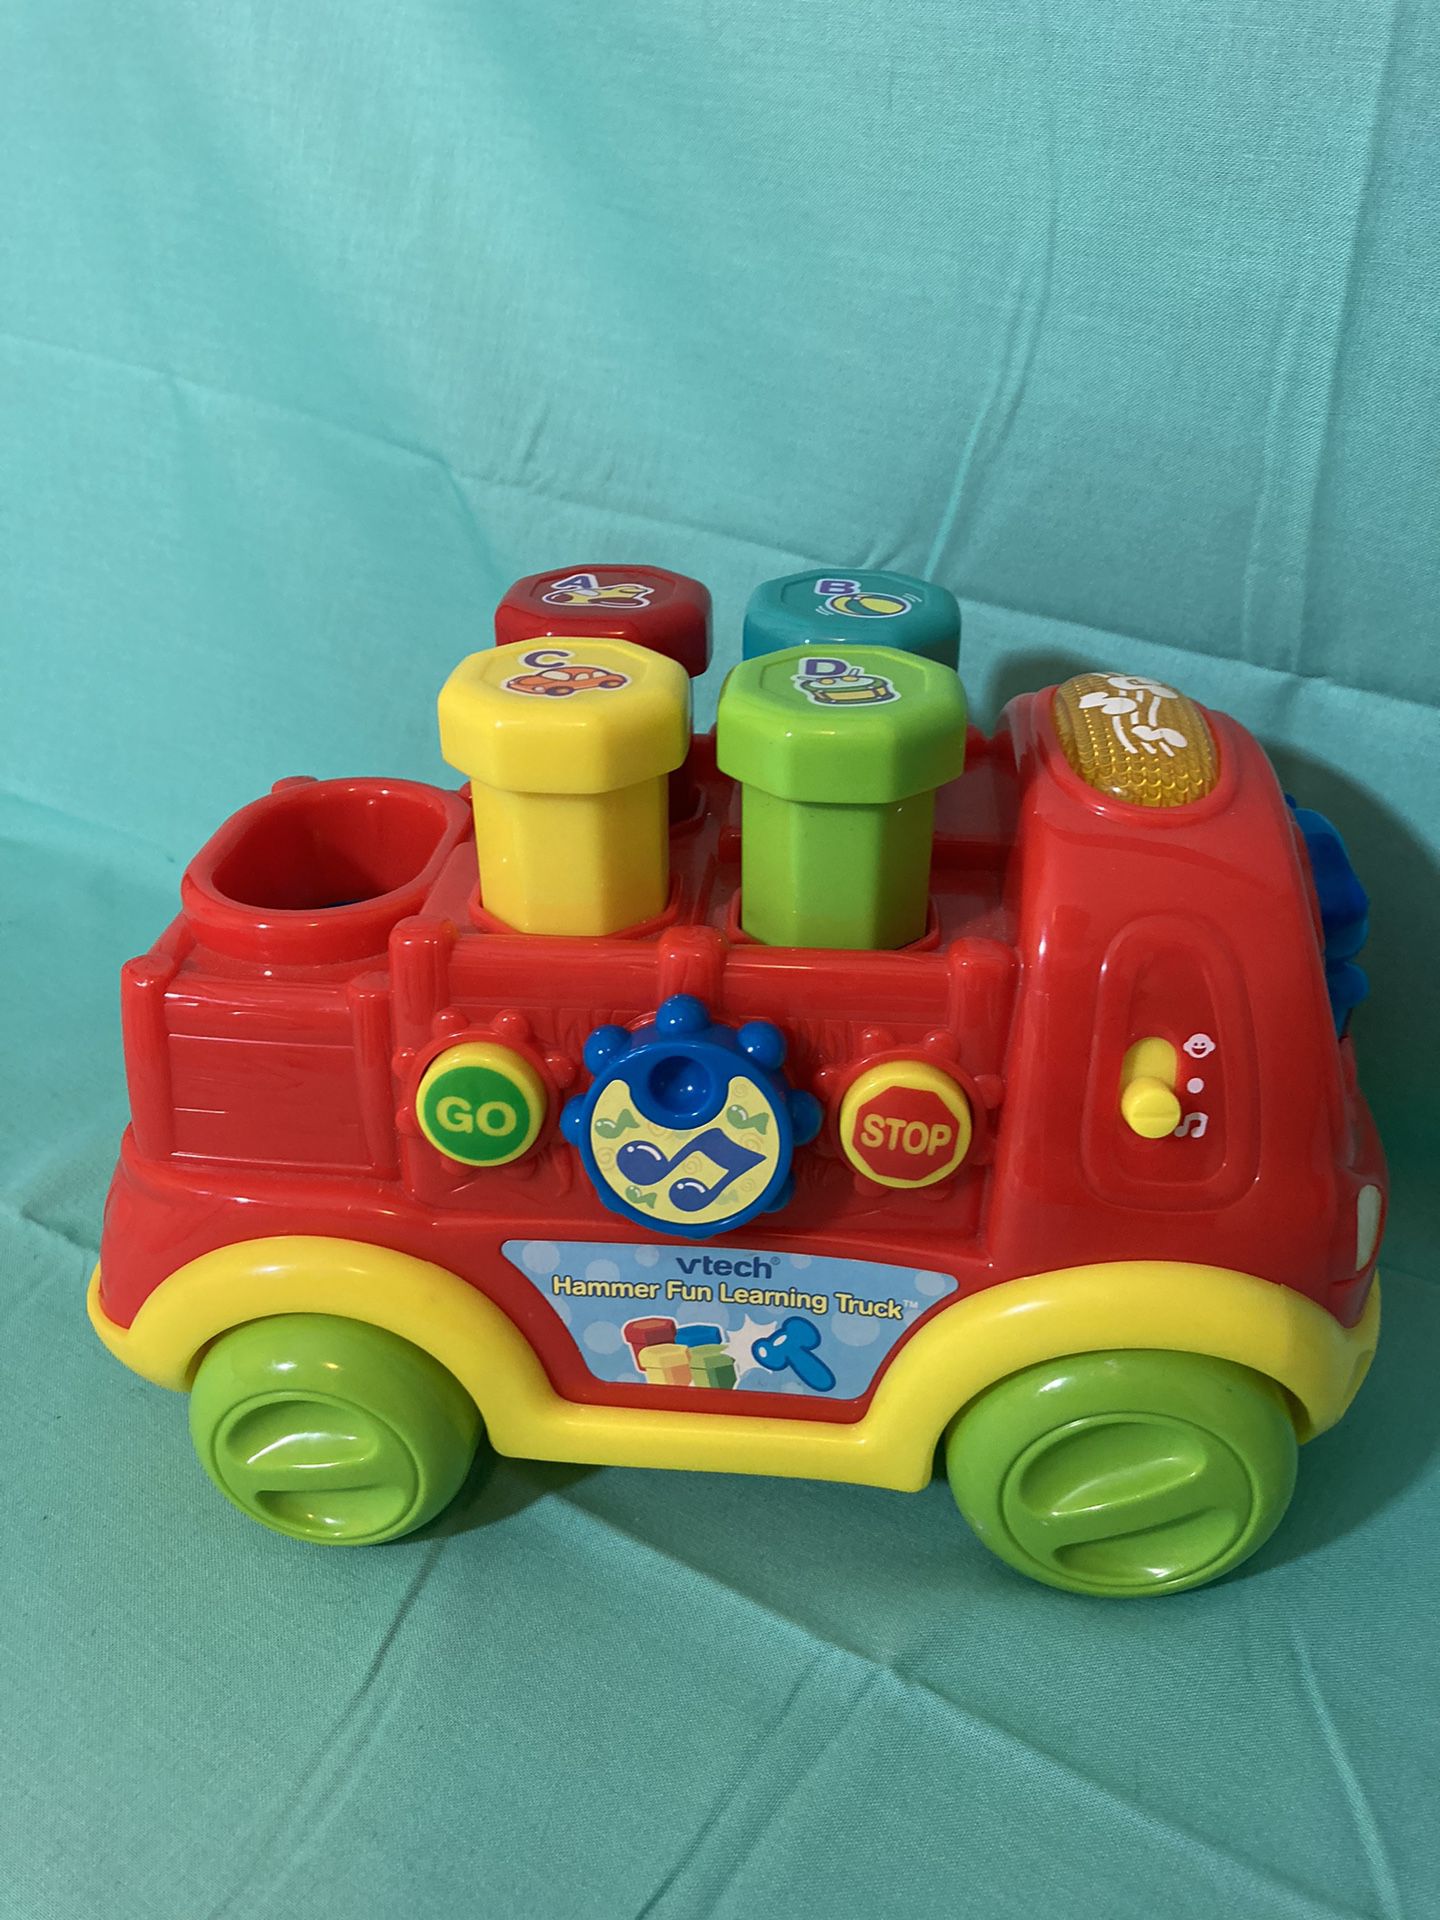 VTech Fun Learning Truck - lights up, plays music and songs $4 